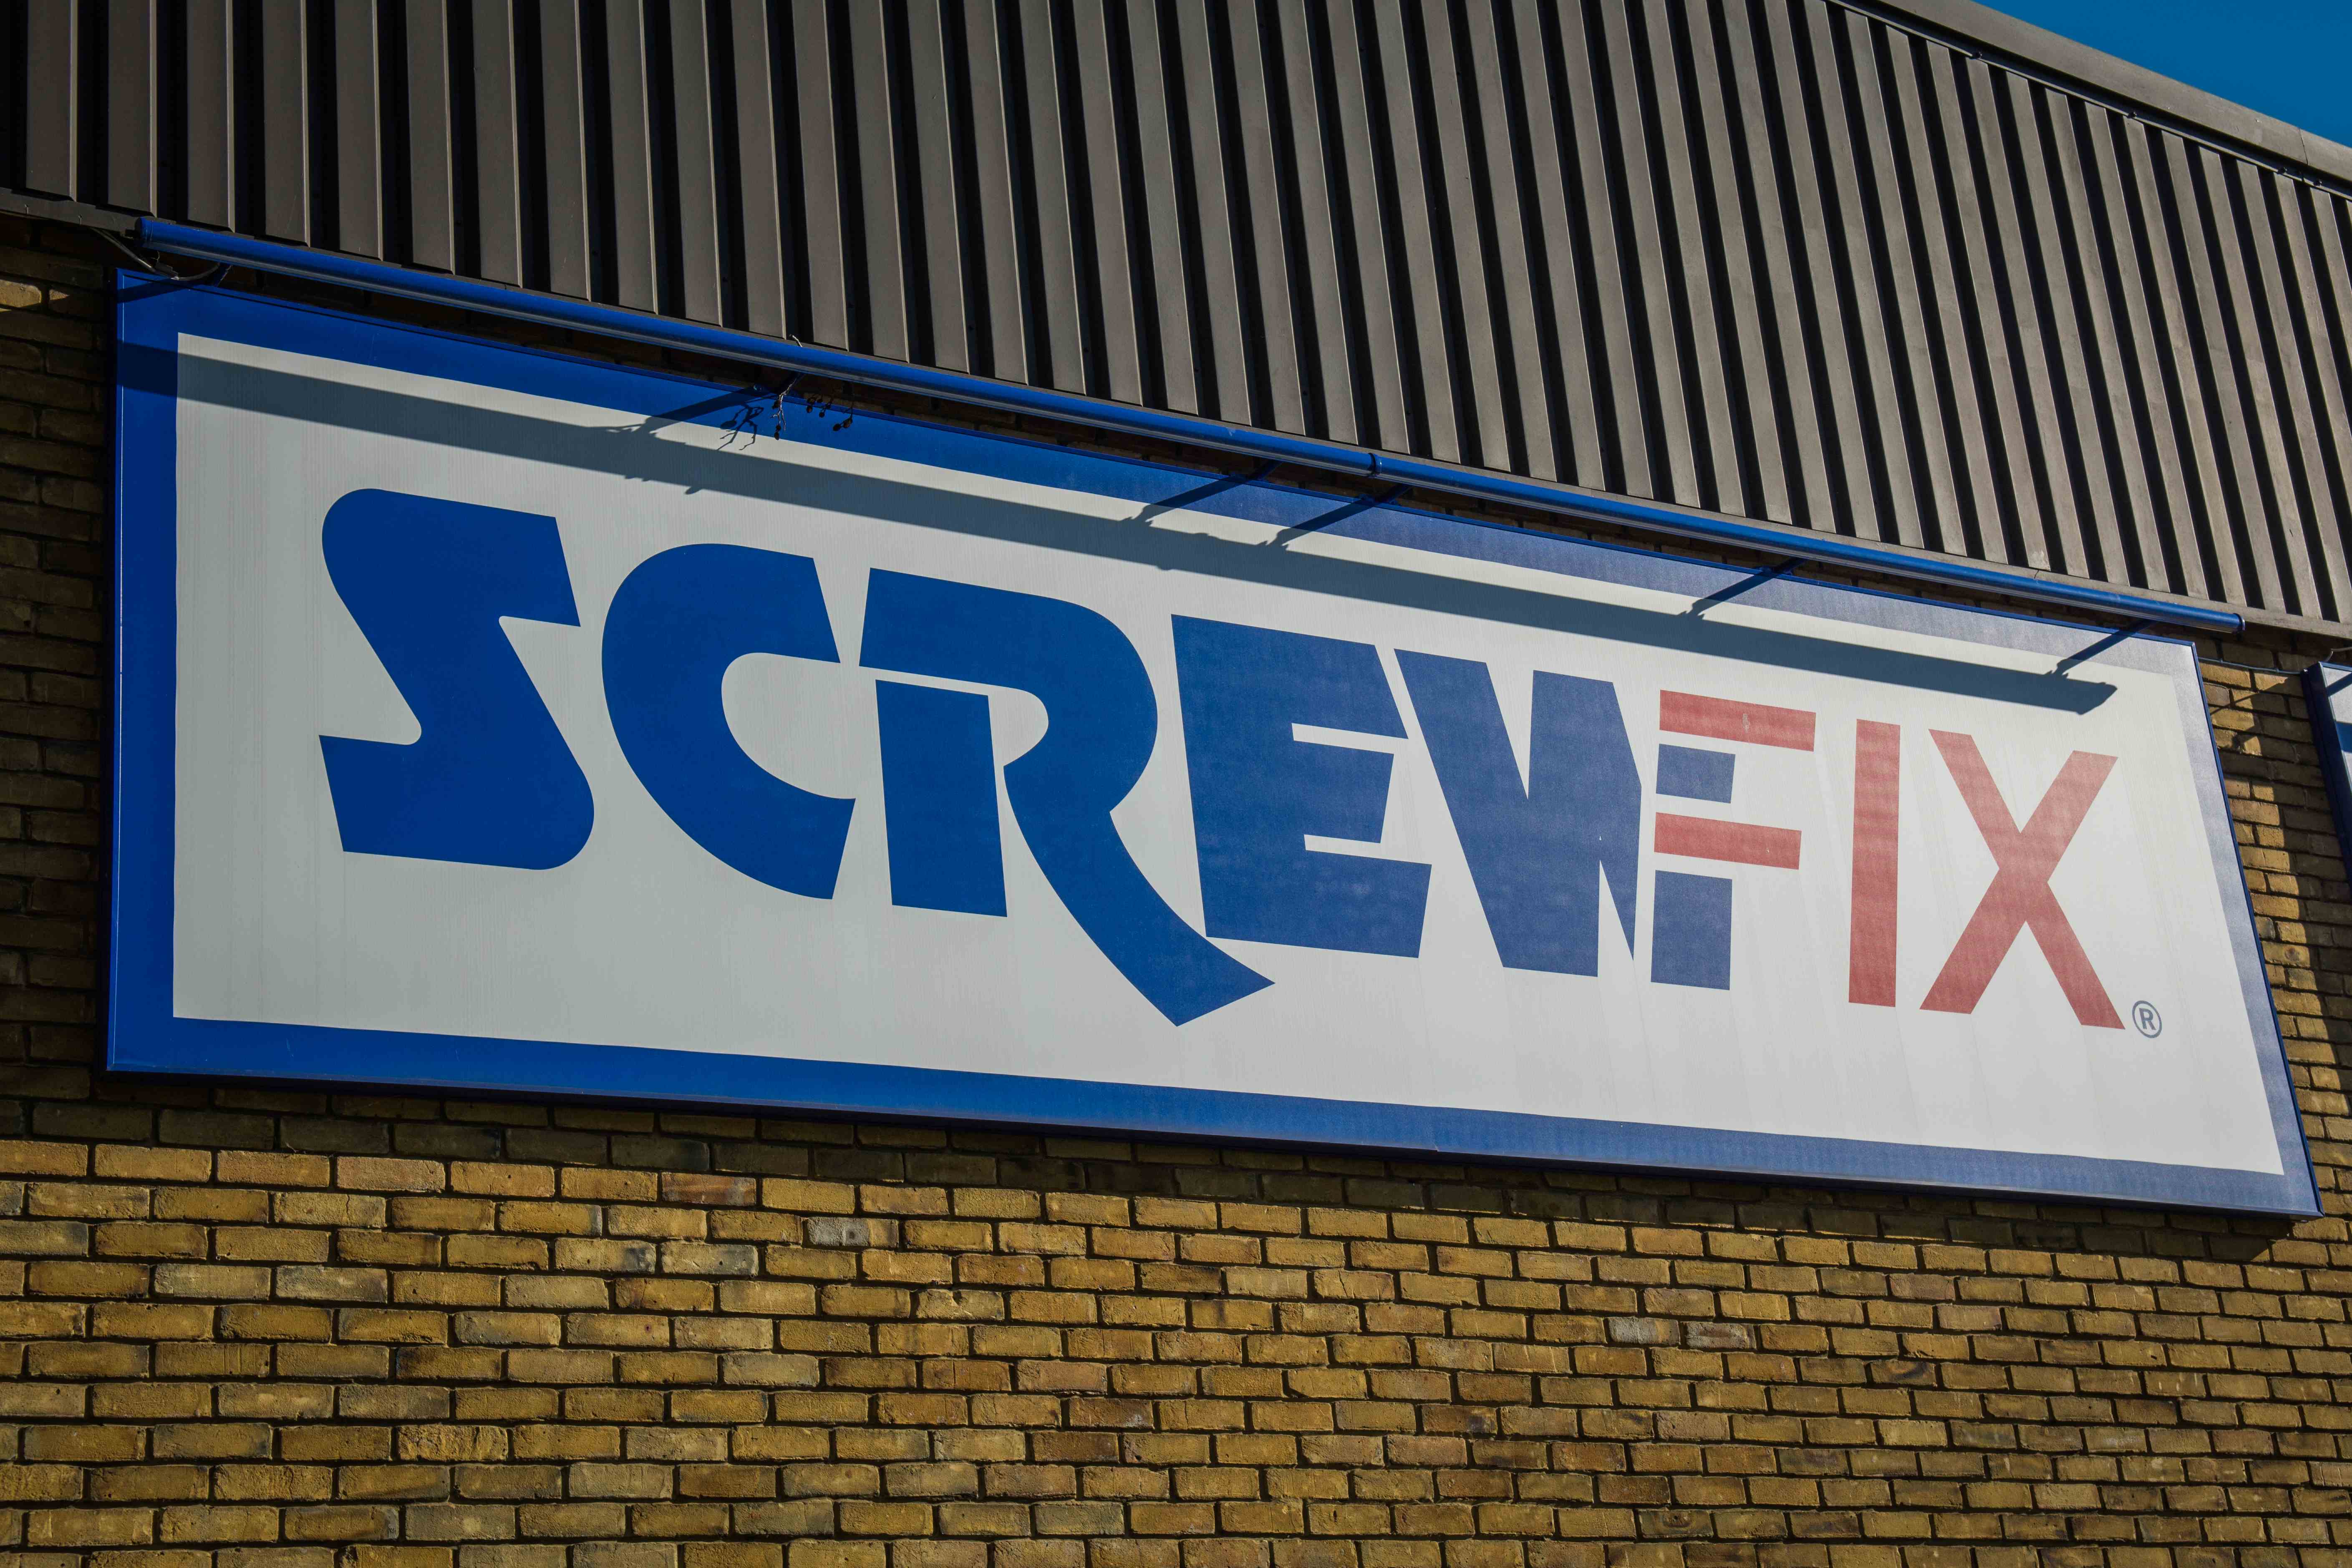 Screwfix halves Scope 1 and 2 emissions in the last four years